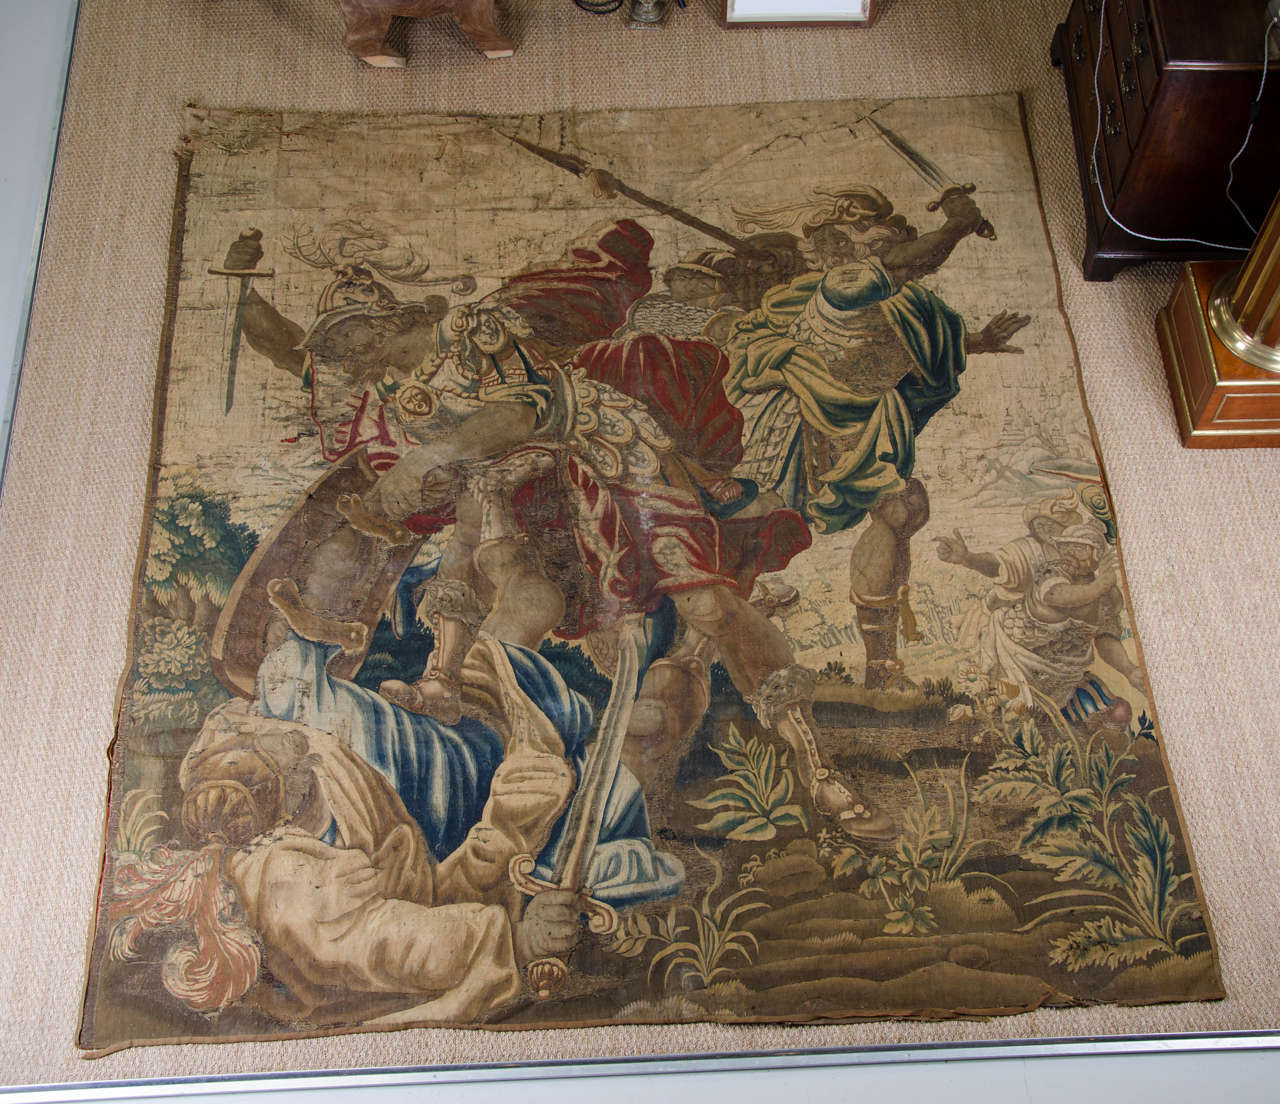 Fabulous good quality fragment from a Flemish battle scene, circa 1650.
Retaining labels from Maison Chevalier, Paris.
Dimensions: 270 cm x 240 cm.

Professionally re-backed with linen, cleaned and restored, an impressive piece. Please contact